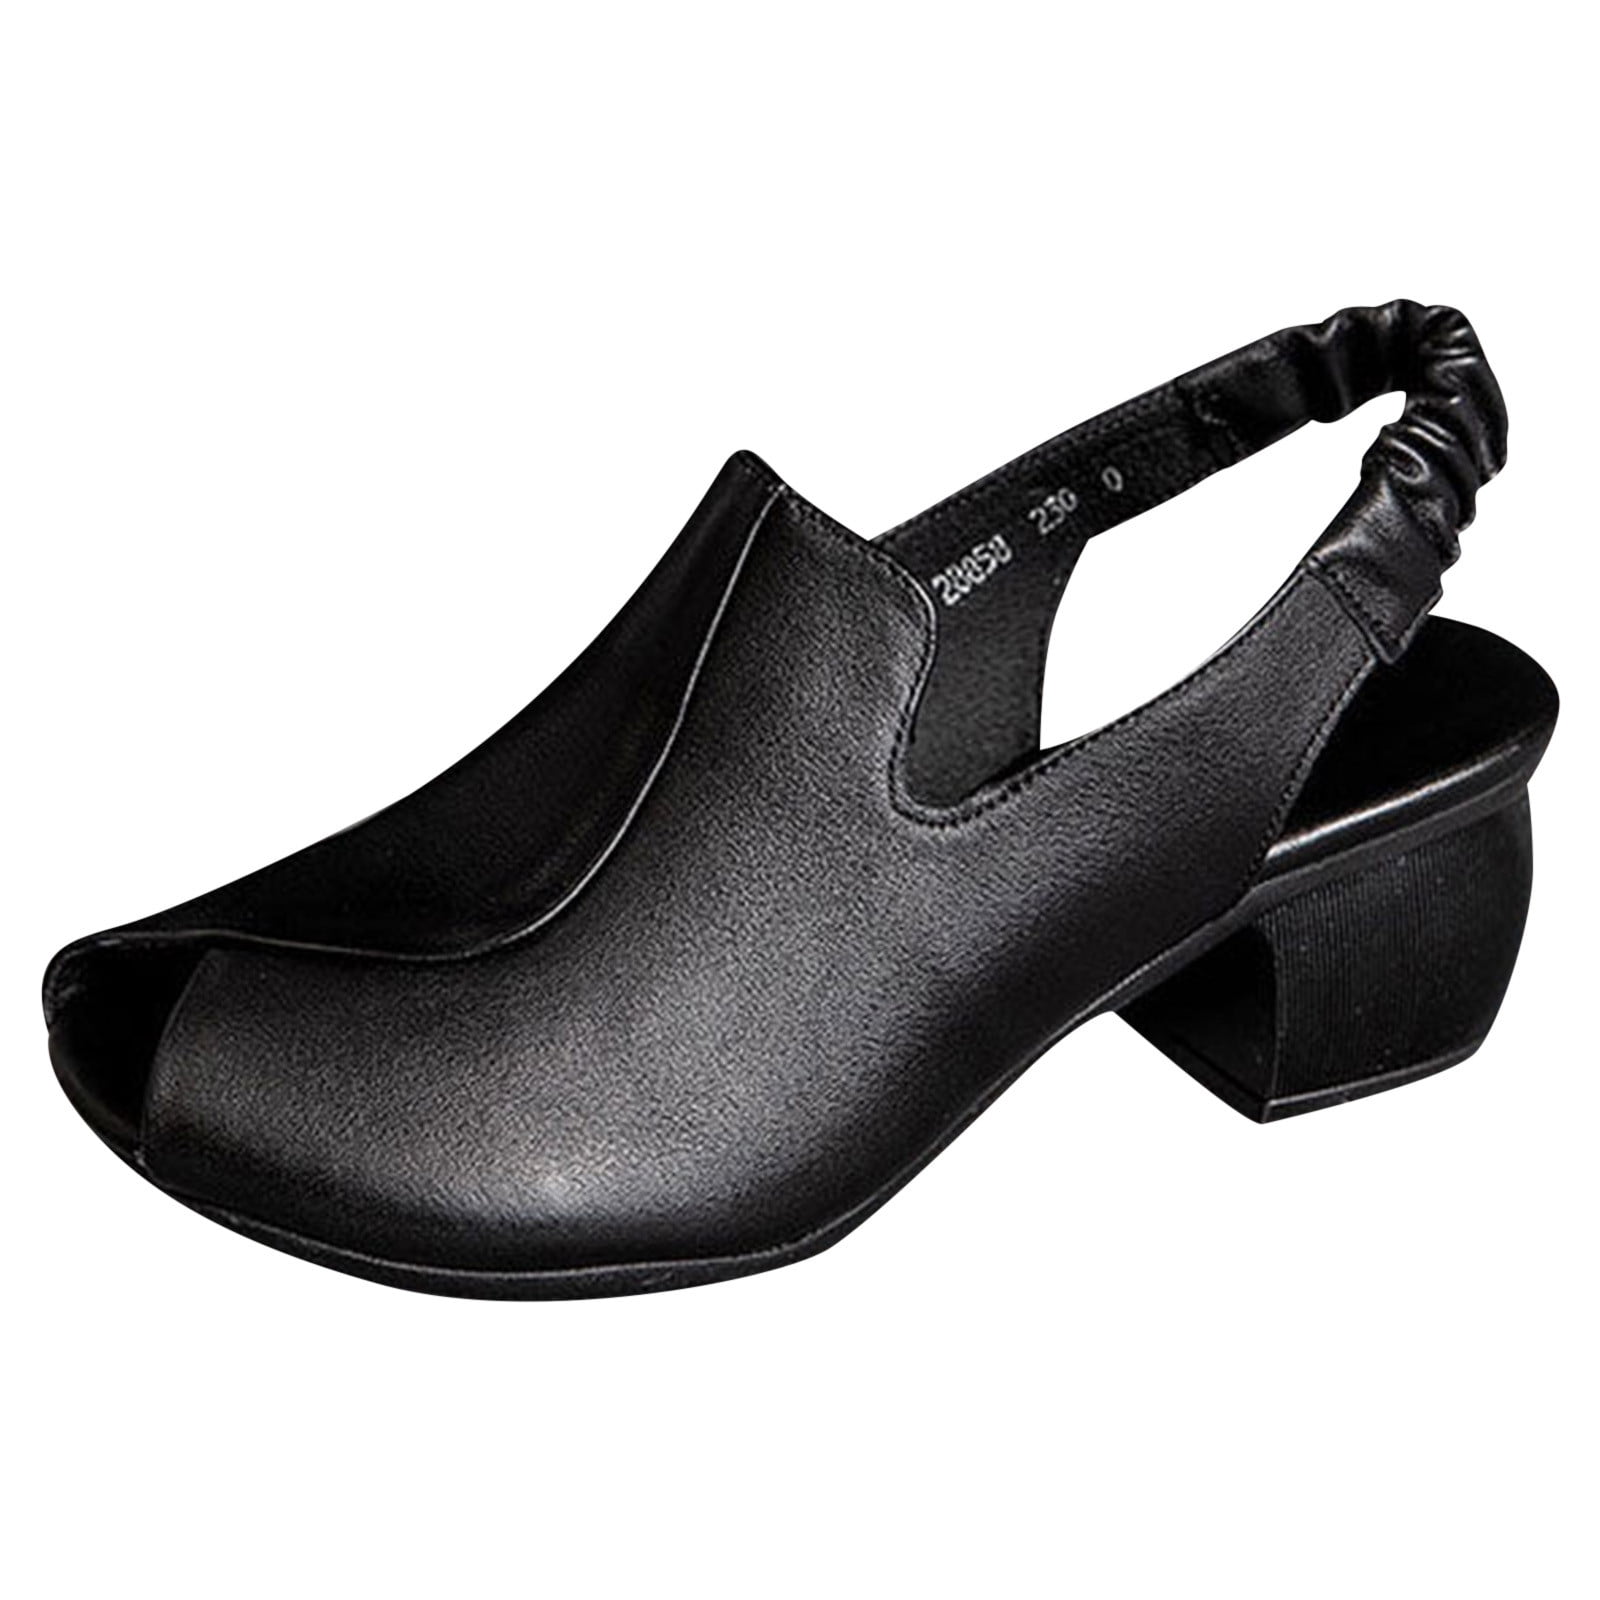 arch support dress shoes